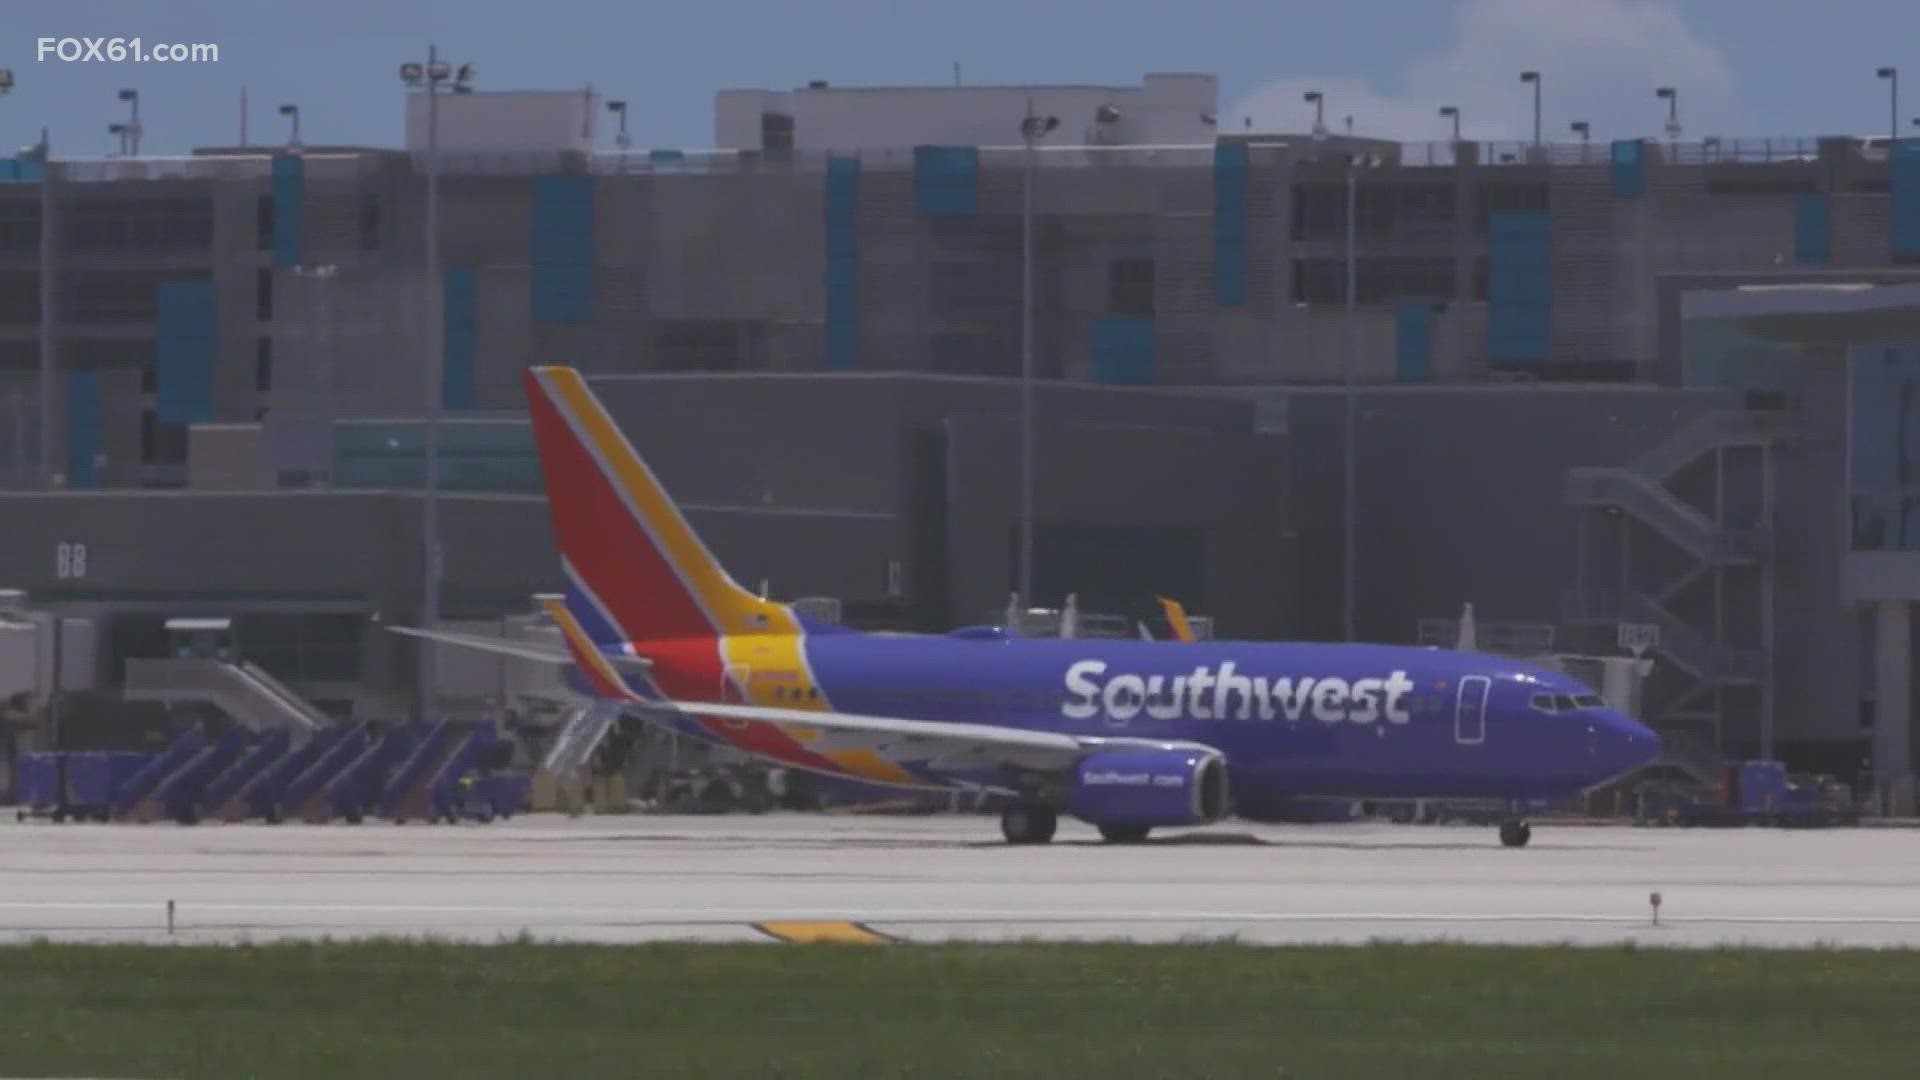 Southwest airlines as well as American Airlines have been impacted by staffing shortages.